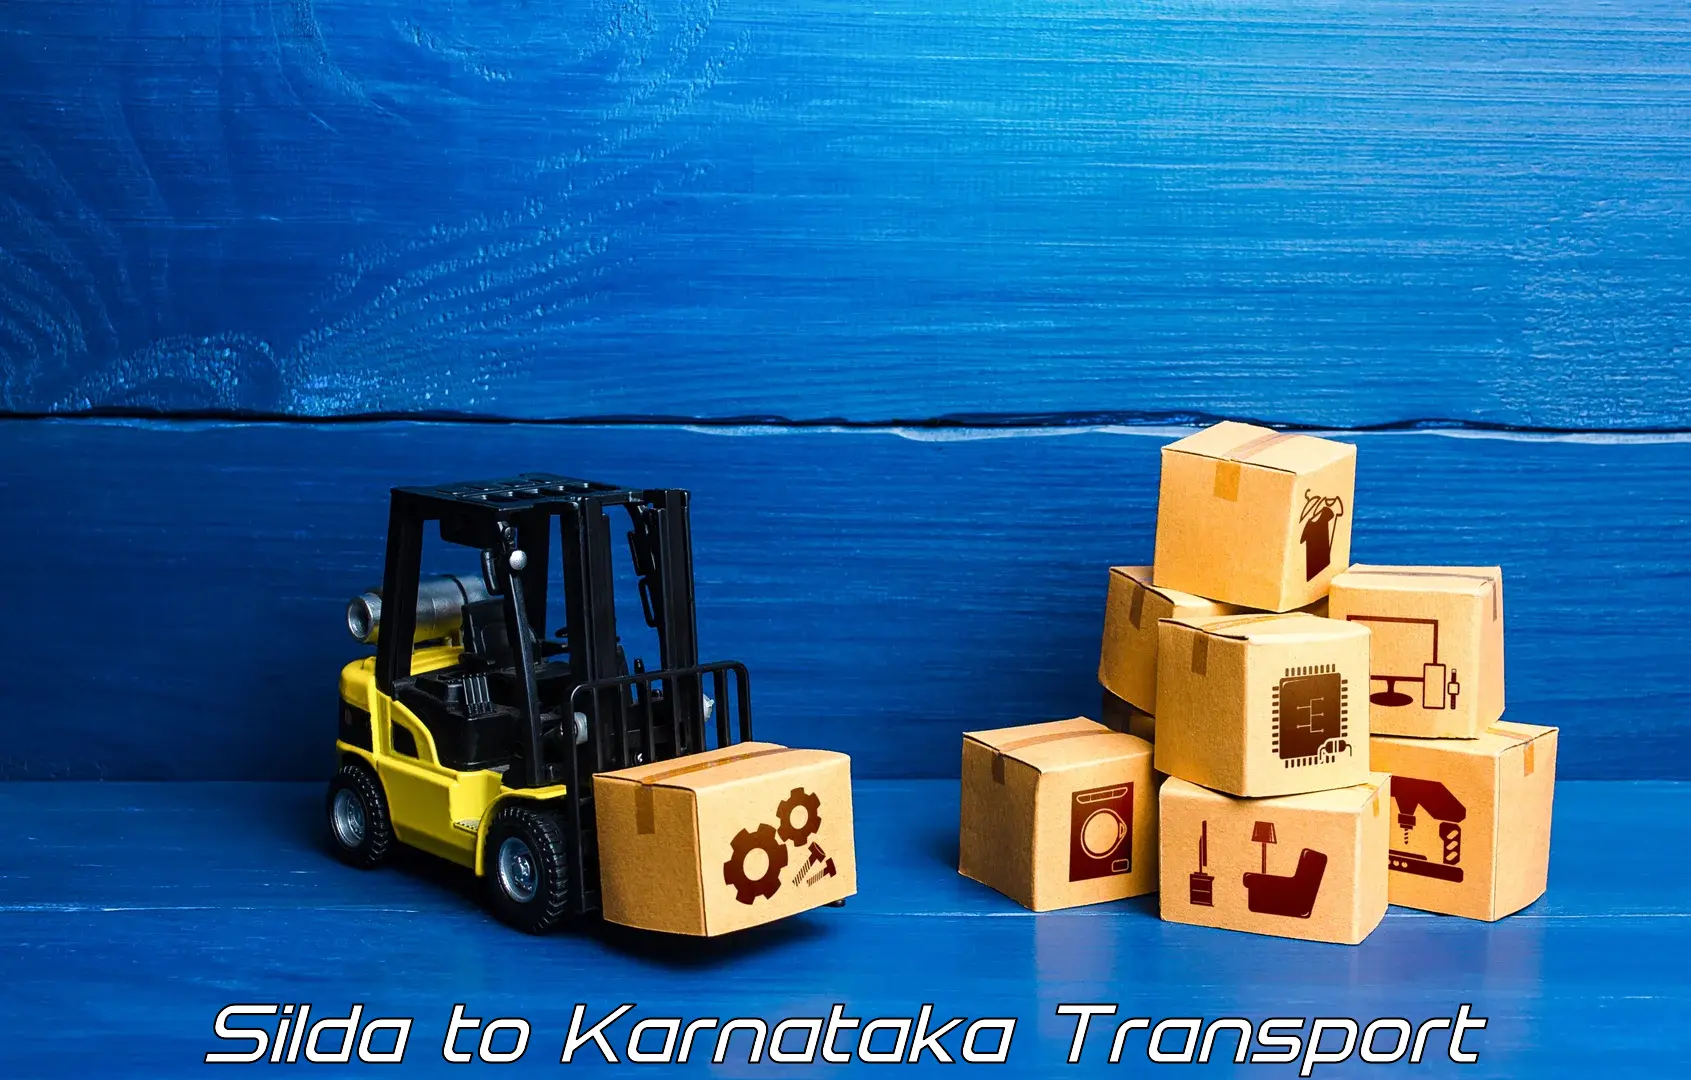 Truck transport companies in India Silda to Laxmeshwar